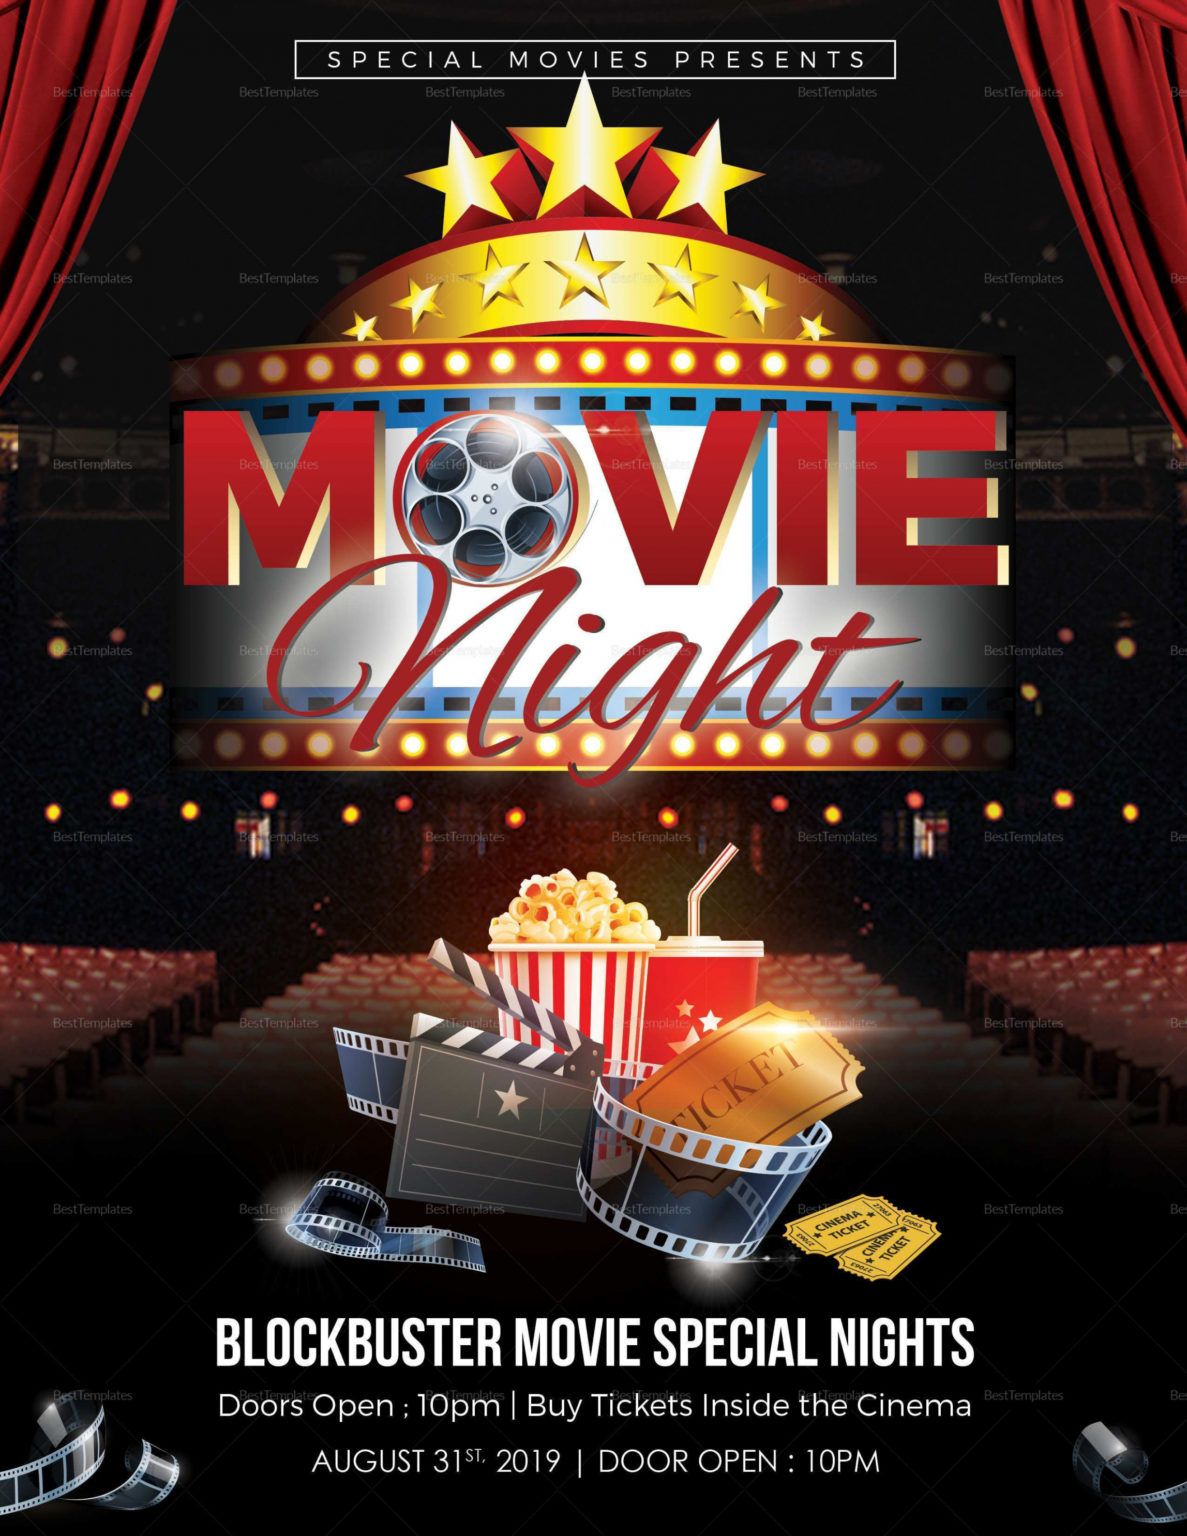 Free 32 Visiting Family Movie Night Flyer Template Photo By Church